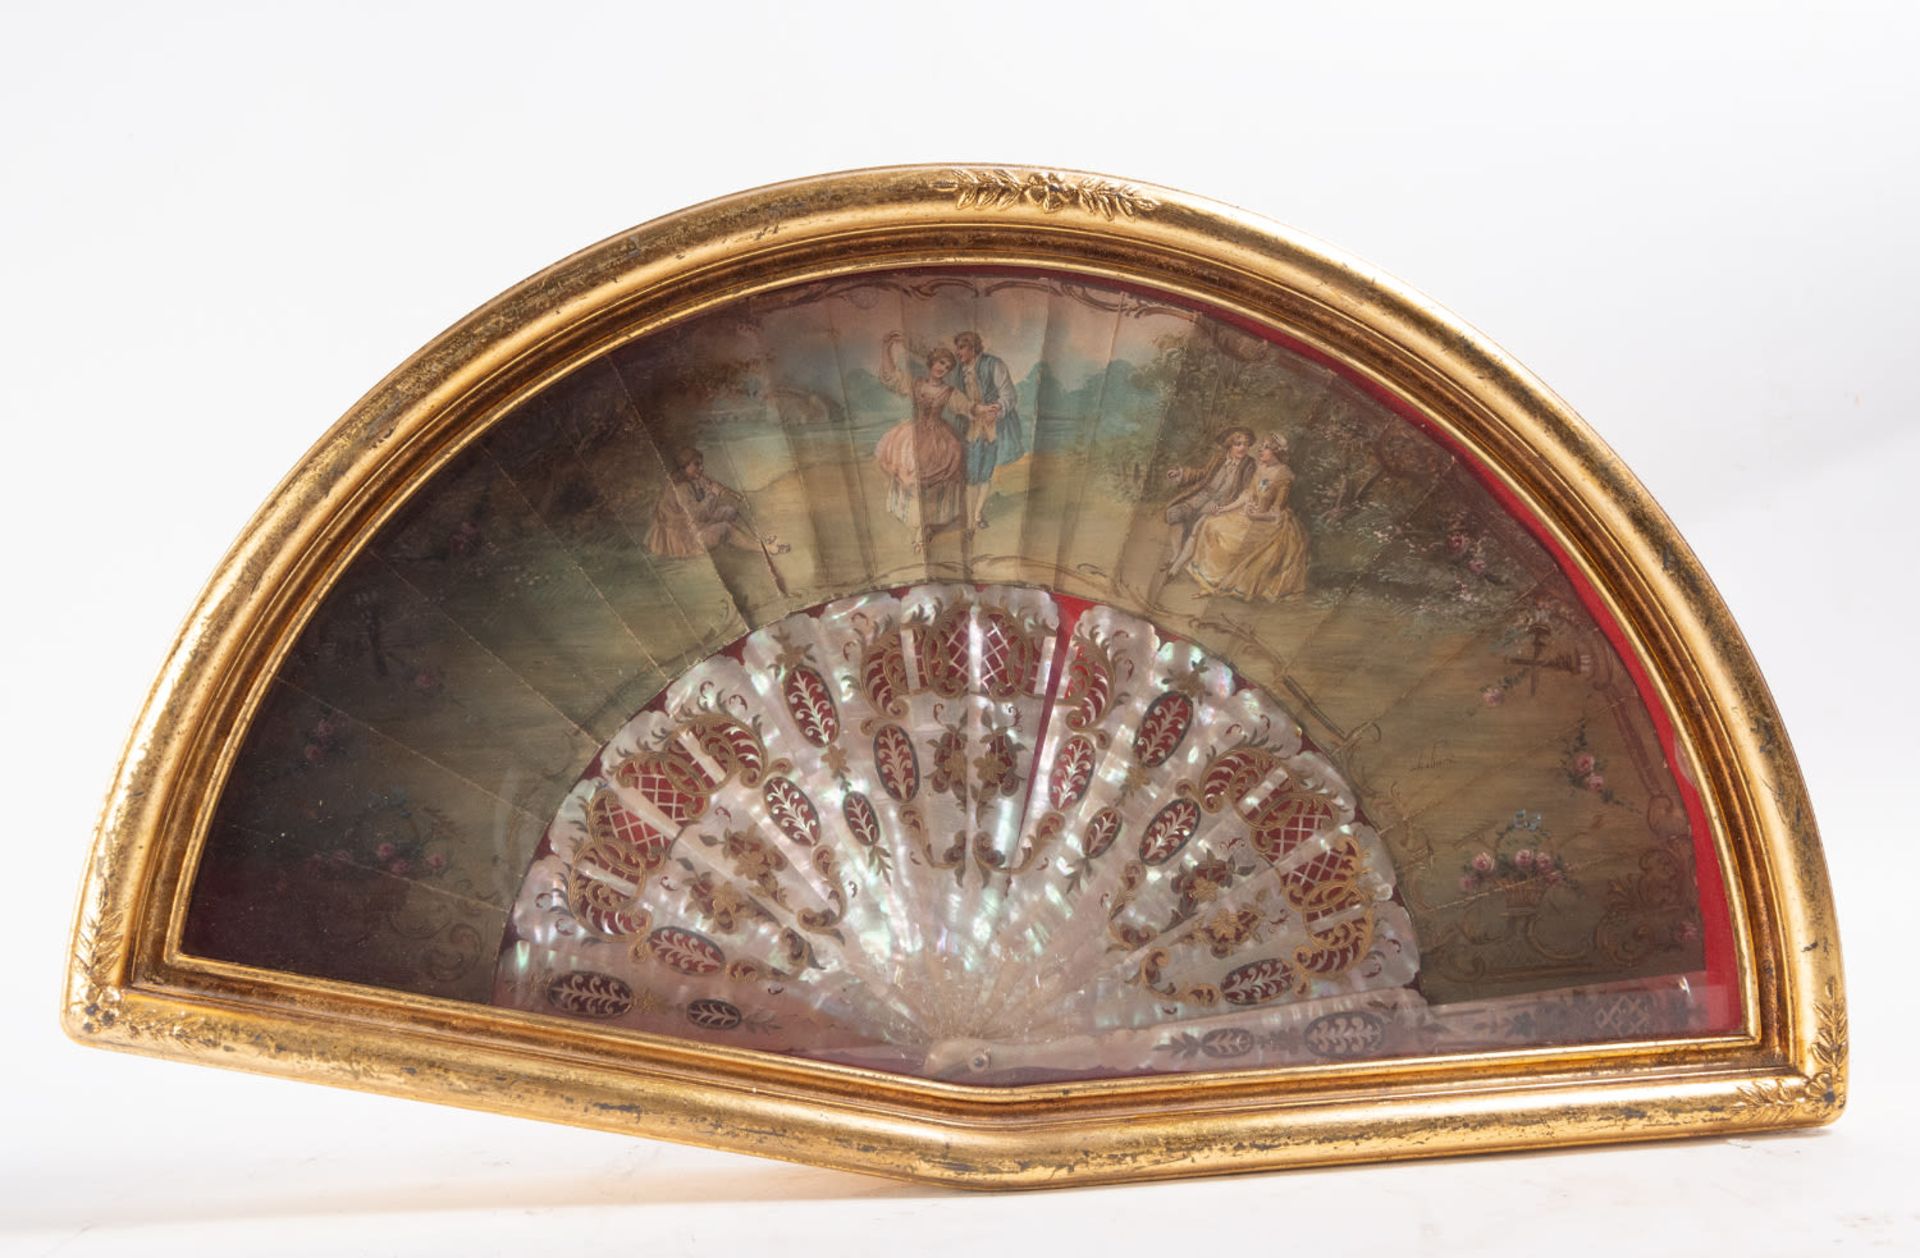 Framed French fan depicting a Romantic scene in mother-of-pearl, 19th century - Image 2 of 2